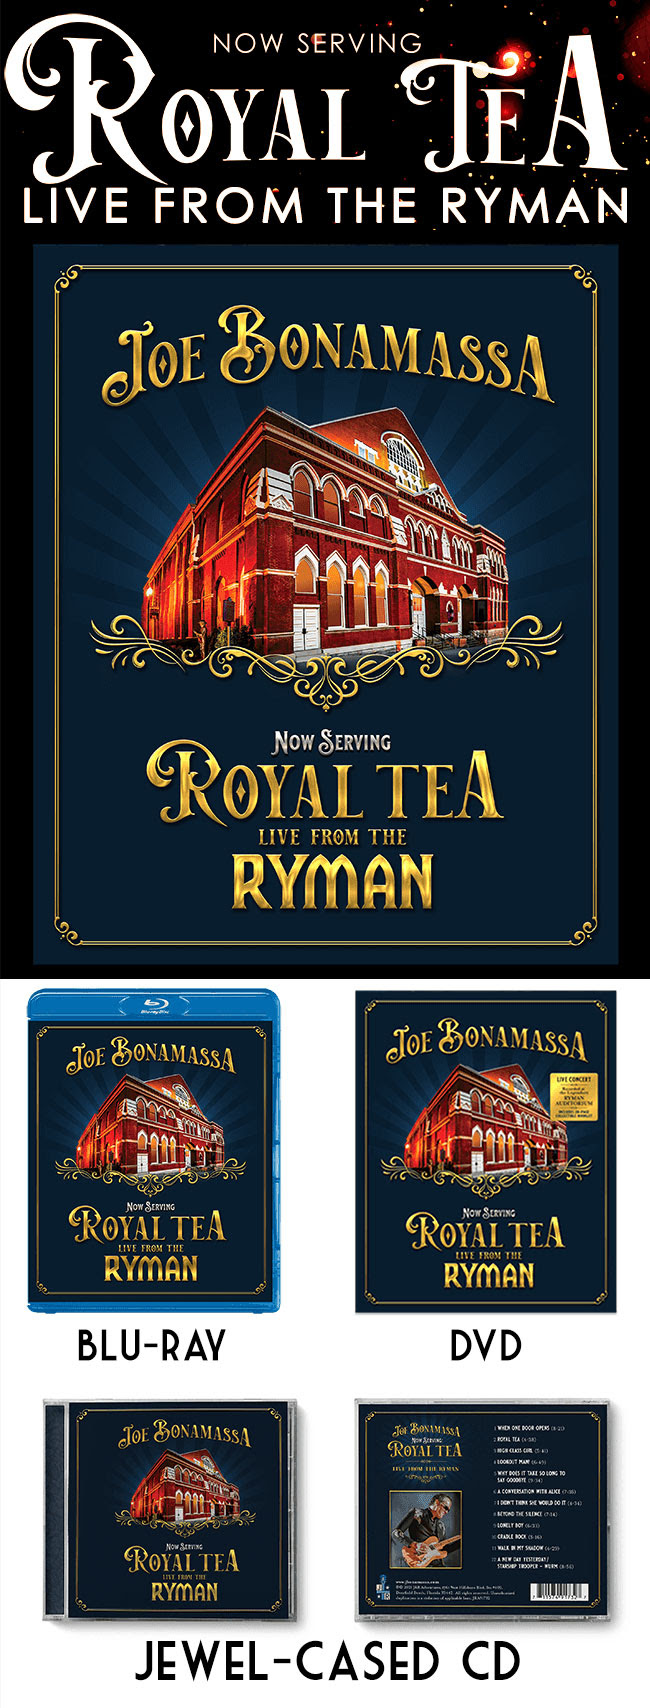 Now Serving: Royal Tea Live from the Ryman - 25% off media and merch!